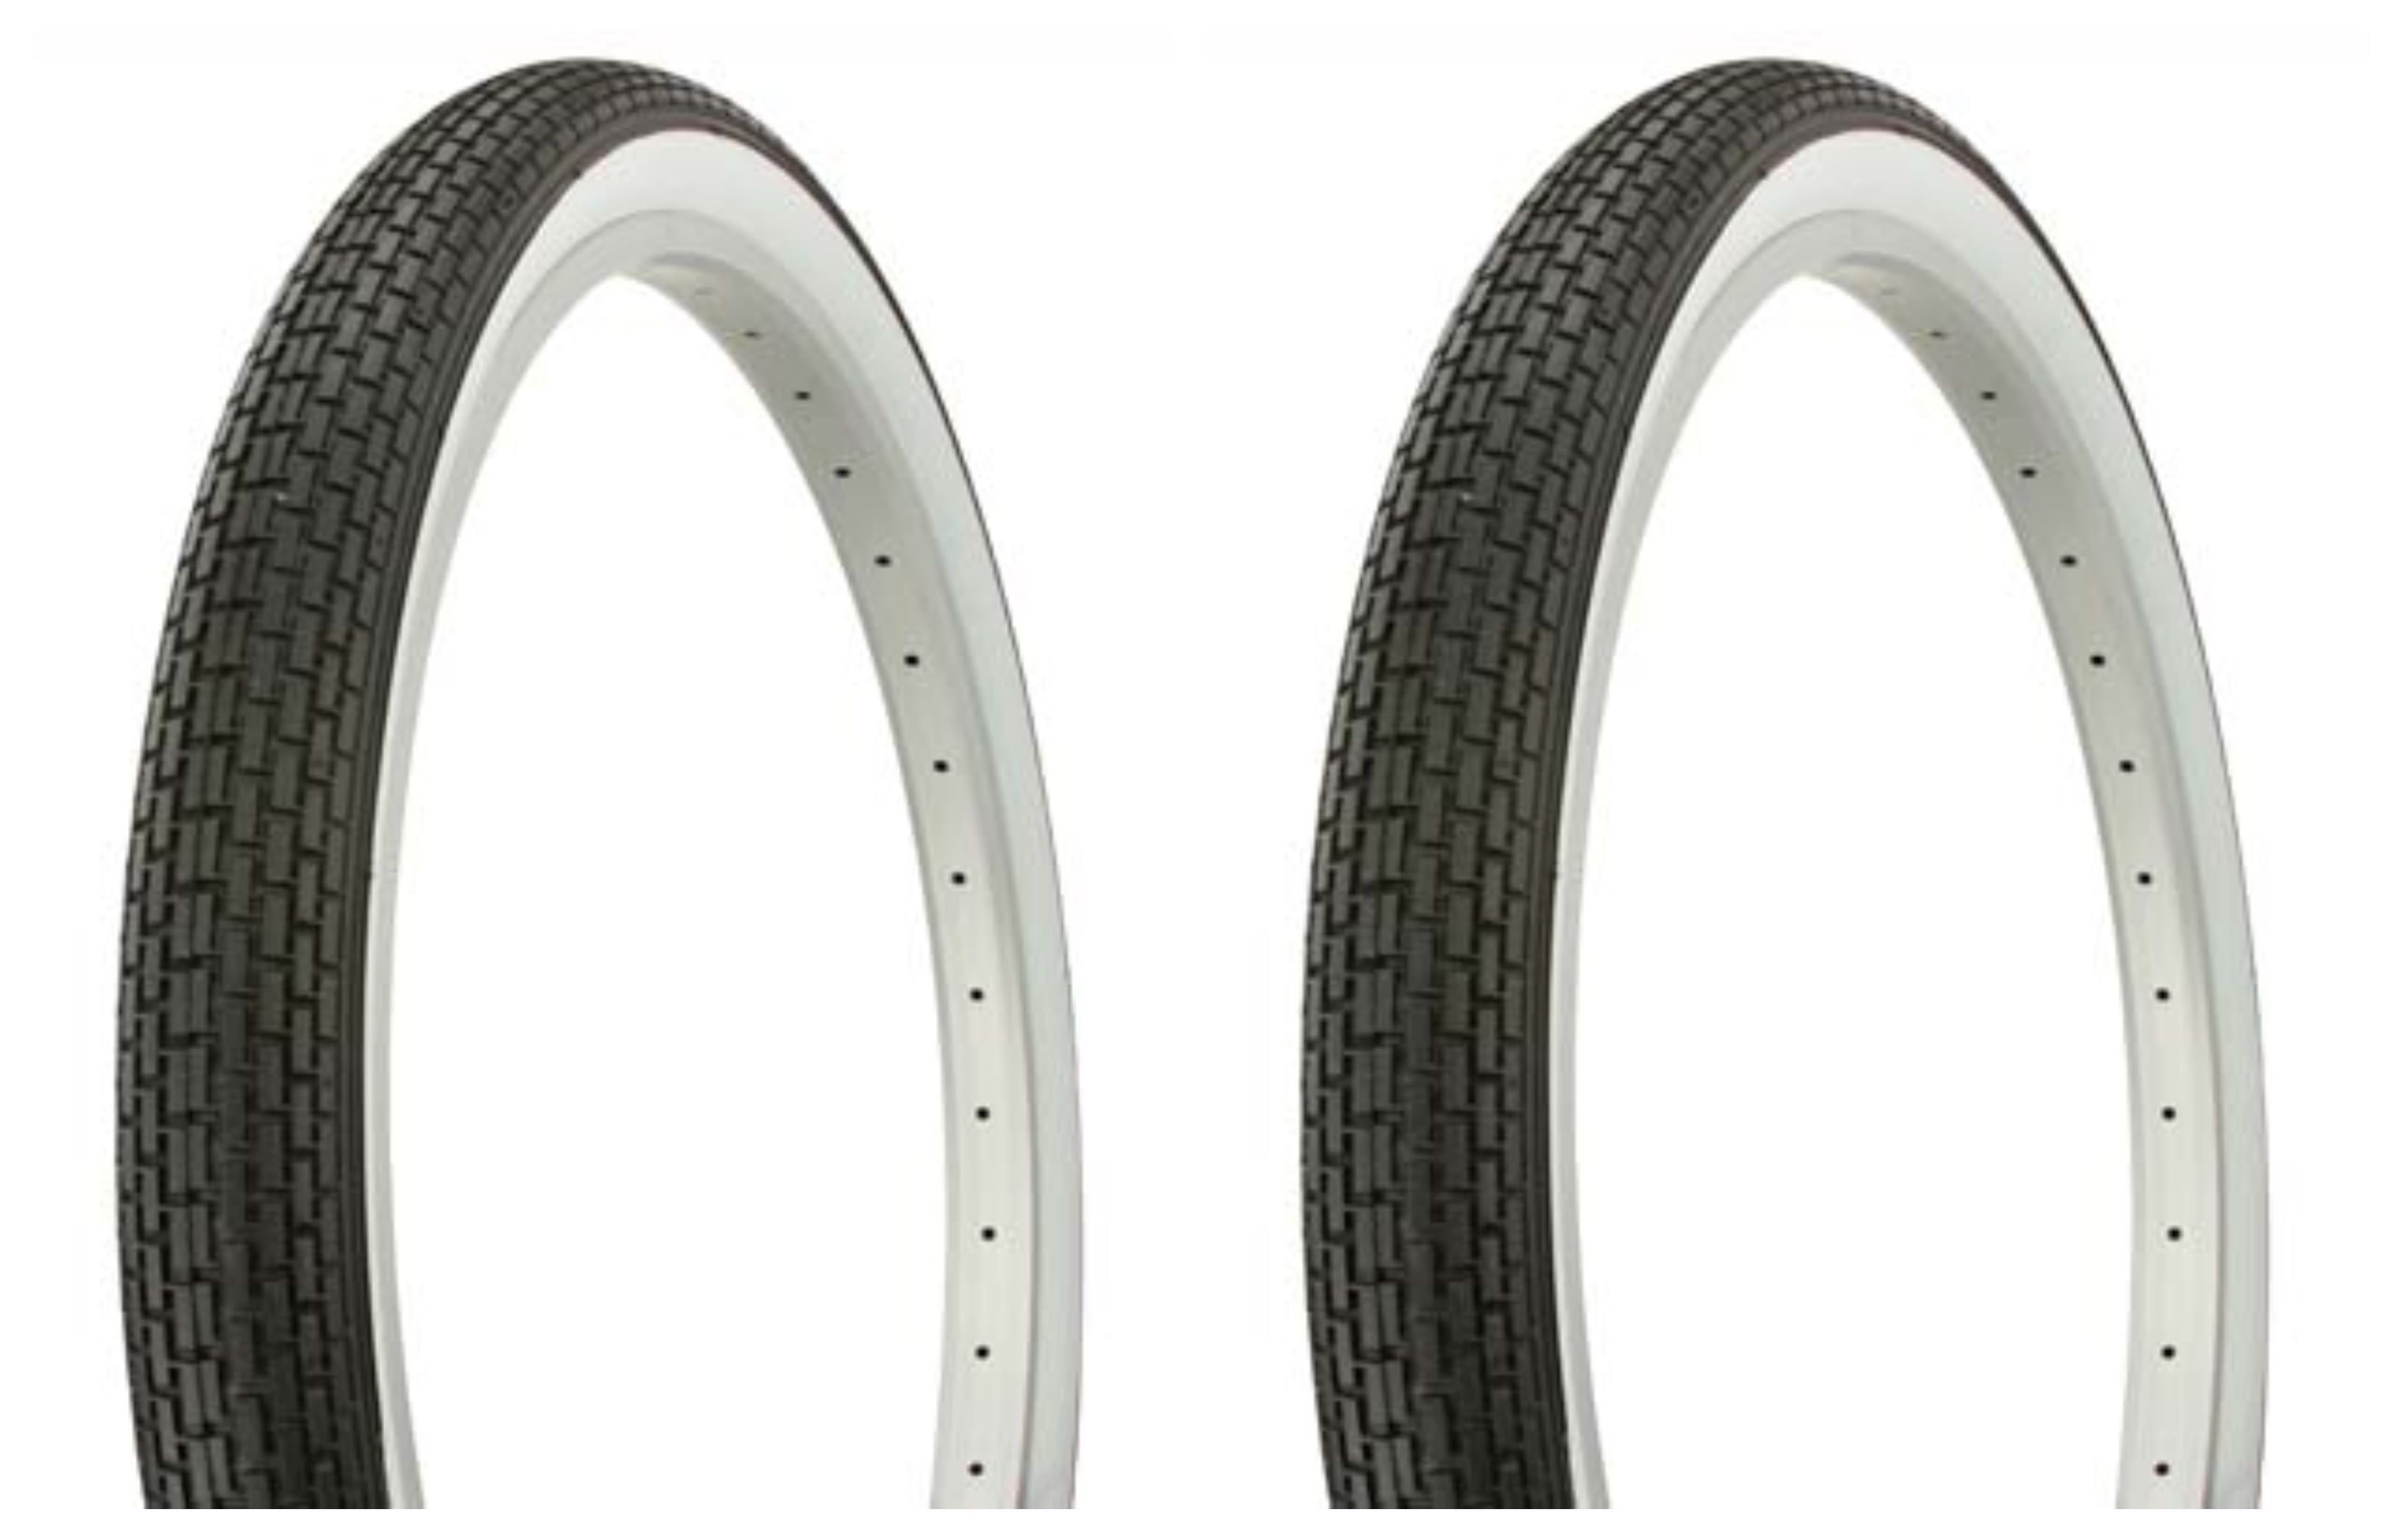 1PAIR Duro Bicycle Tires & Tubes 20" x 2.125" Black/WHITE Side Wall BMX COMPP 3 